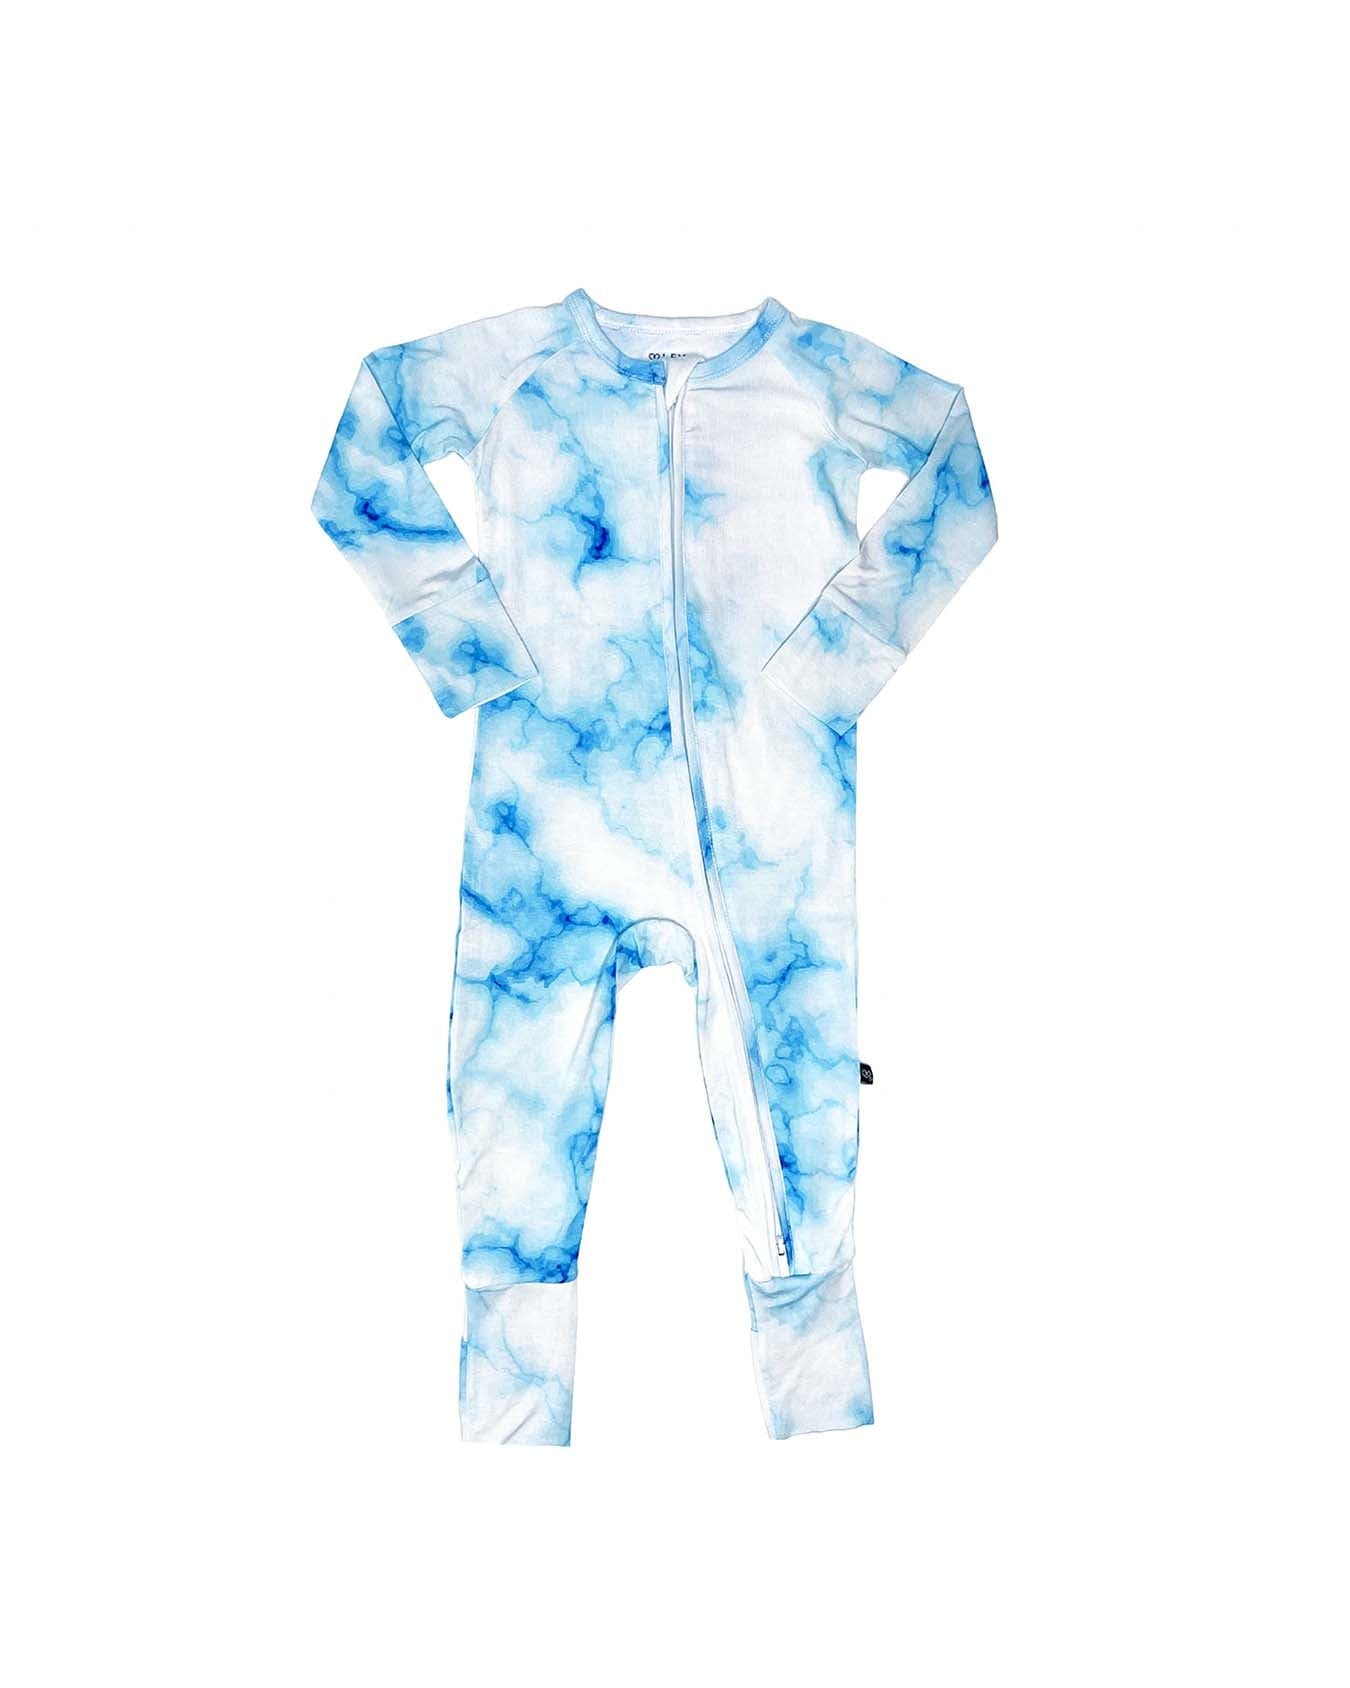 Blue Marble 'Poppy': The Convertible Romper